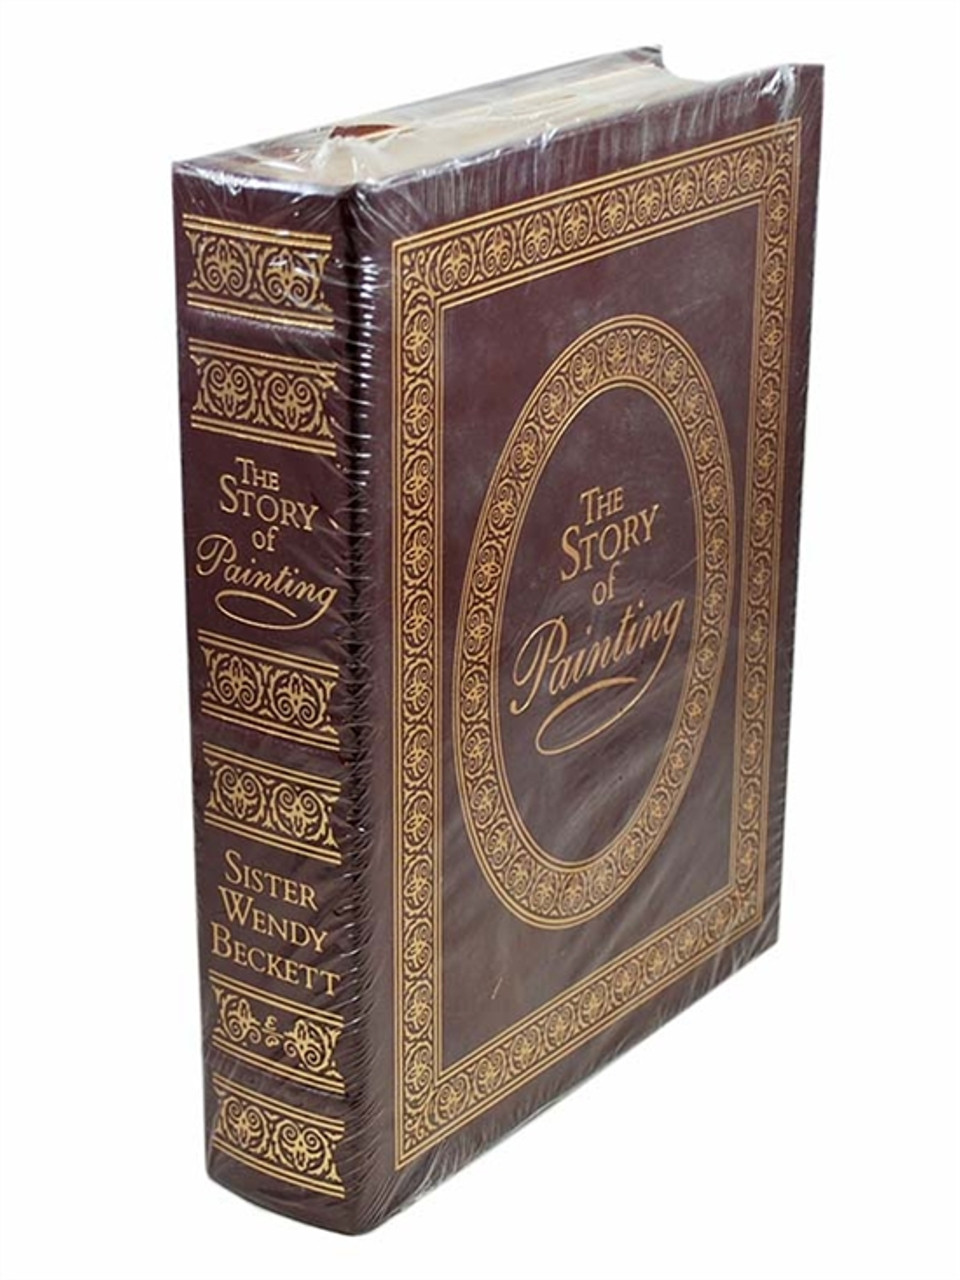 Easton Press "The Story of Painting" Sister Wendy Beckett